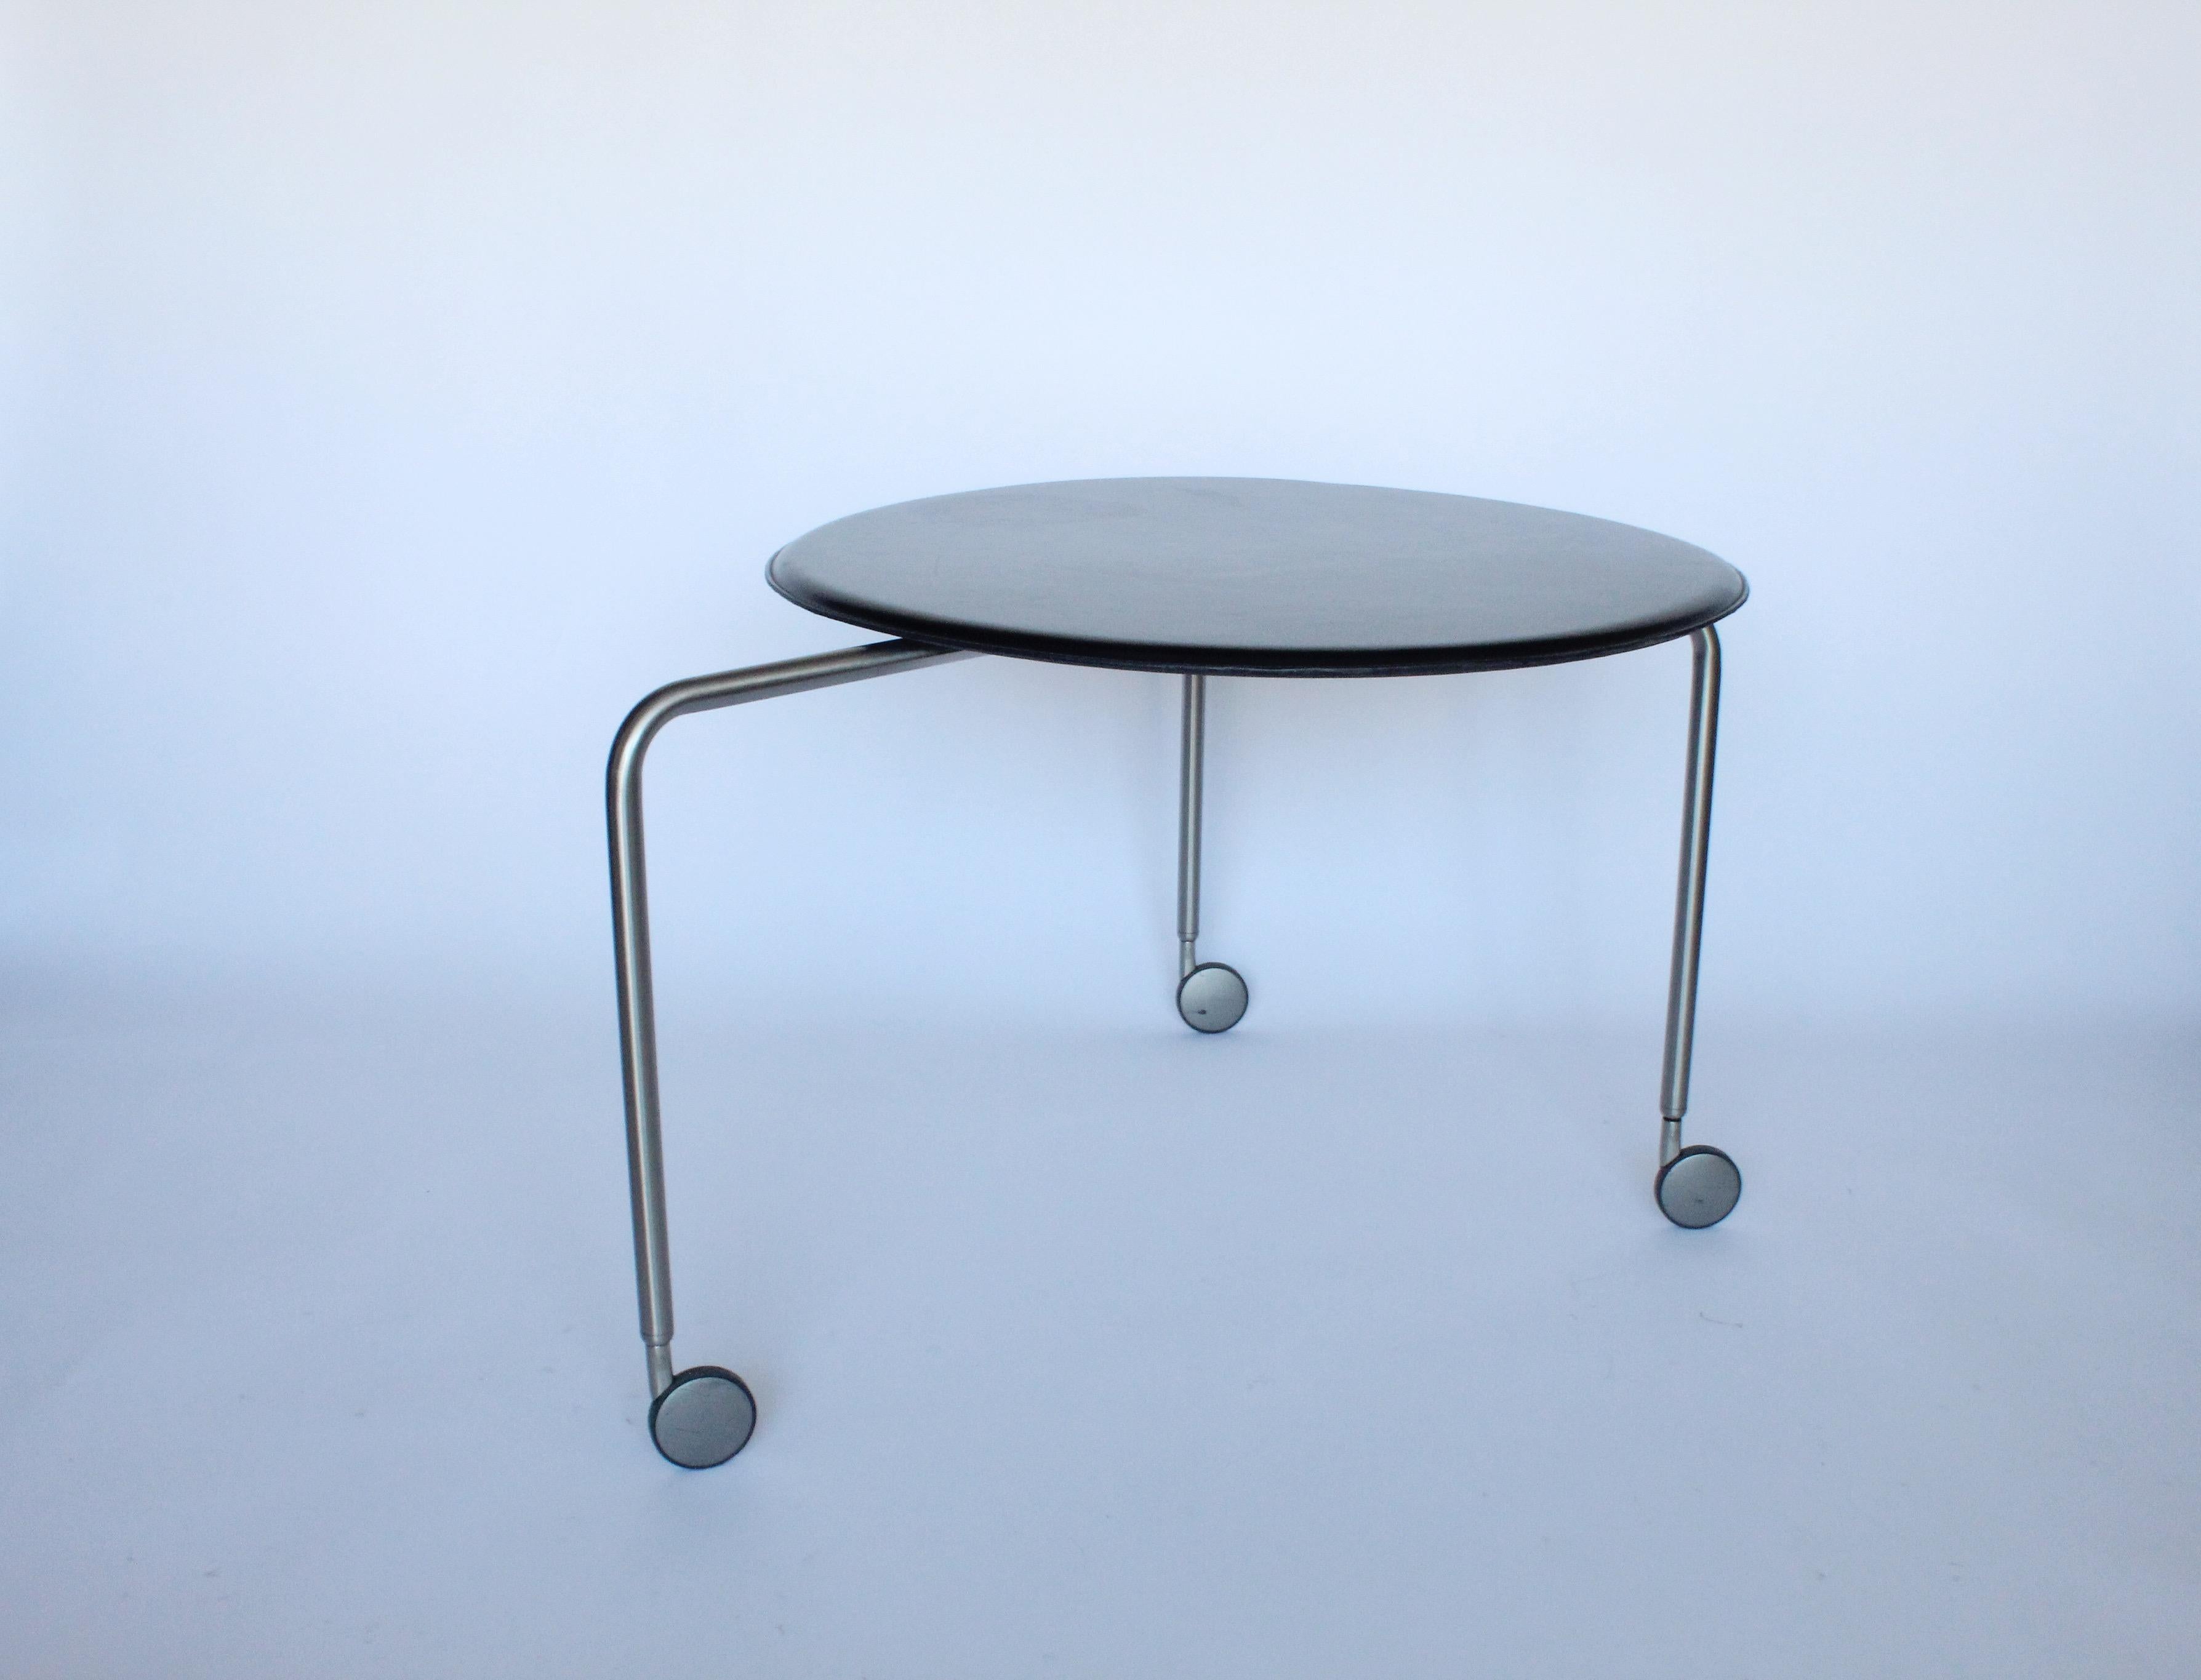 Wonderful example of Italian Postmodern design. Versatile piece on casters that can be used as tea cart, bar cart, serving cart, table. Table is made of leather and stainless steel with exceptional Italian craftsmanship. Table is in great vintage